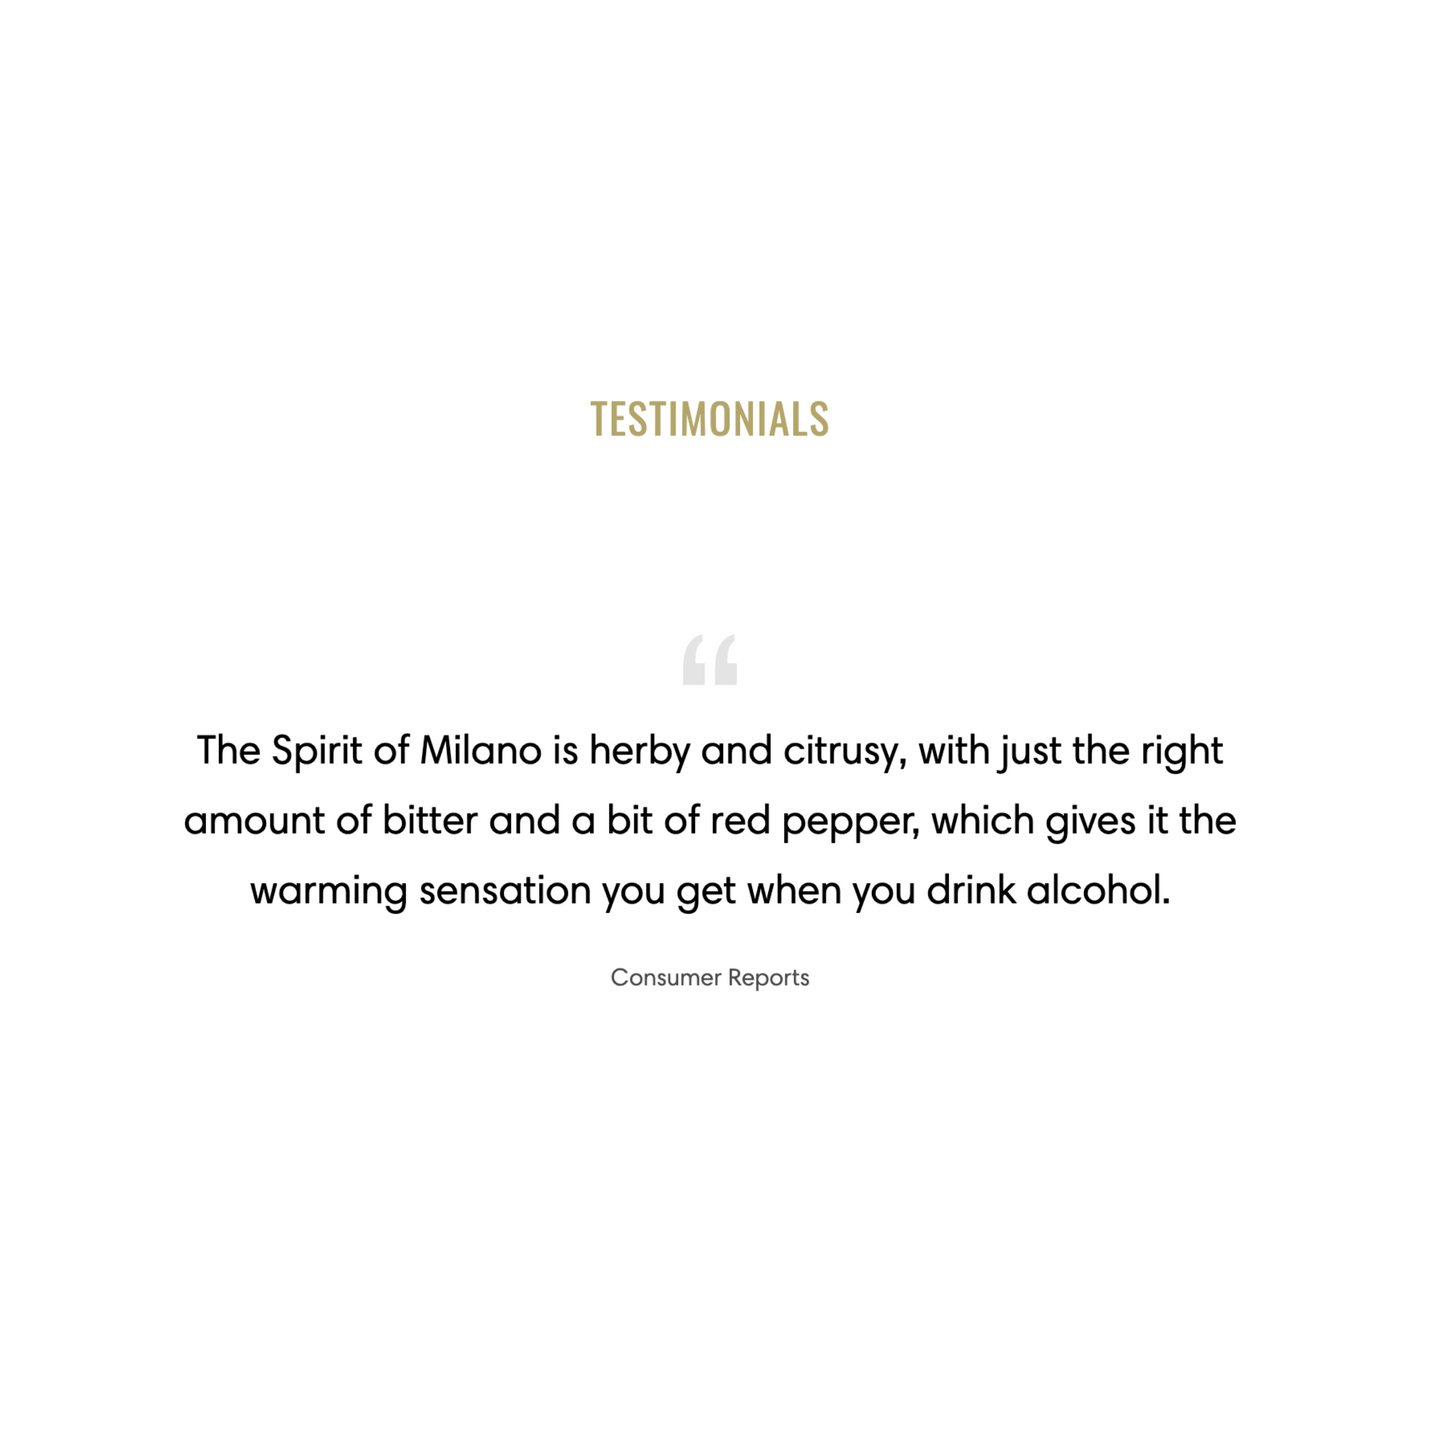 The Spirit of Milano by The Free Spirits Company